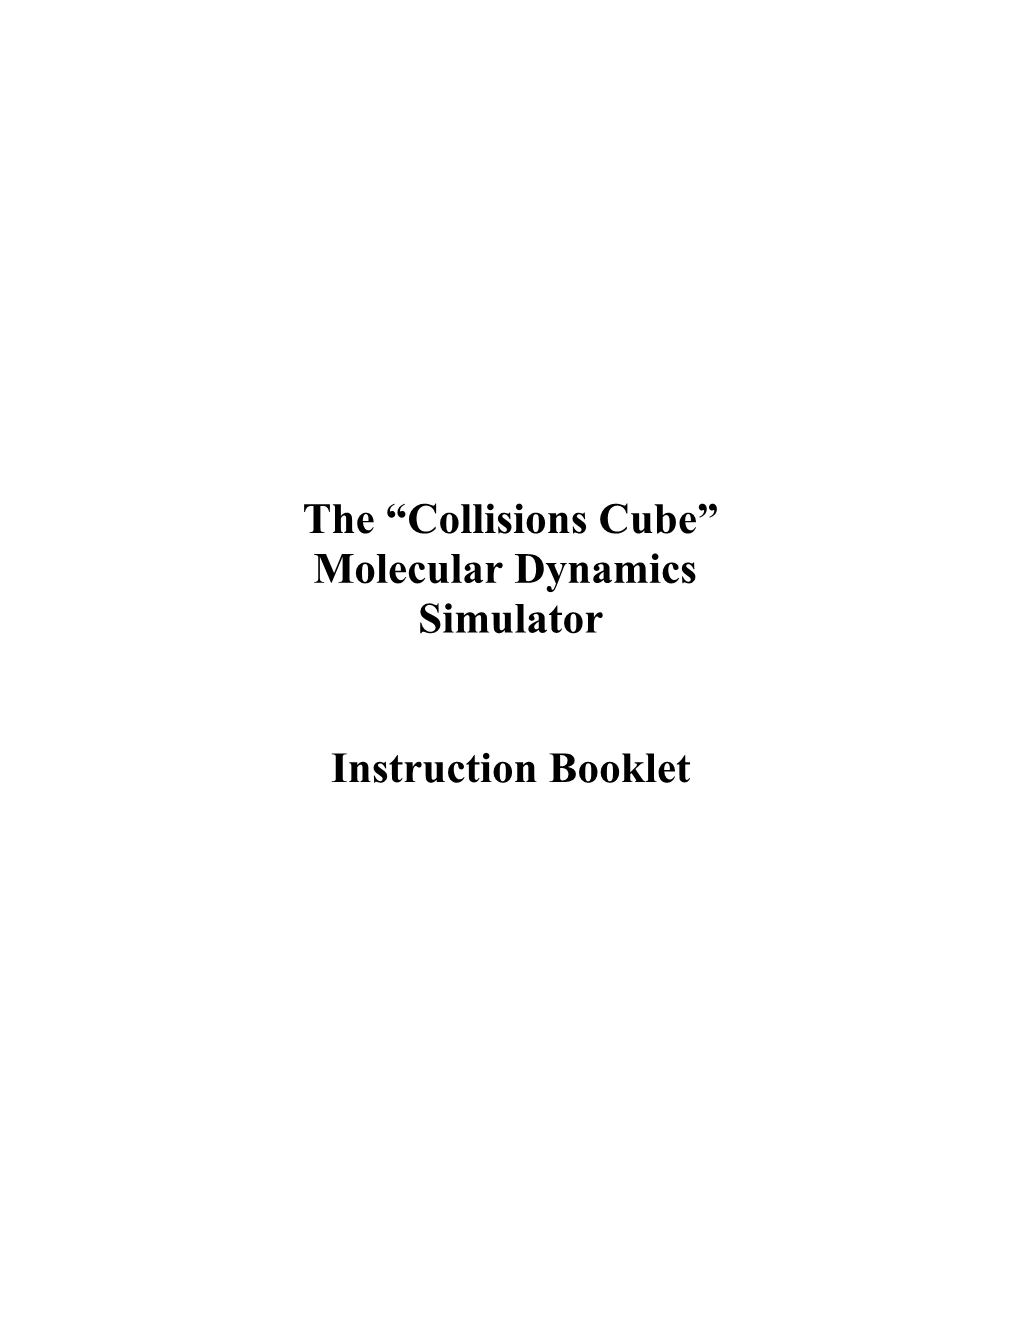 The Collisions Cube